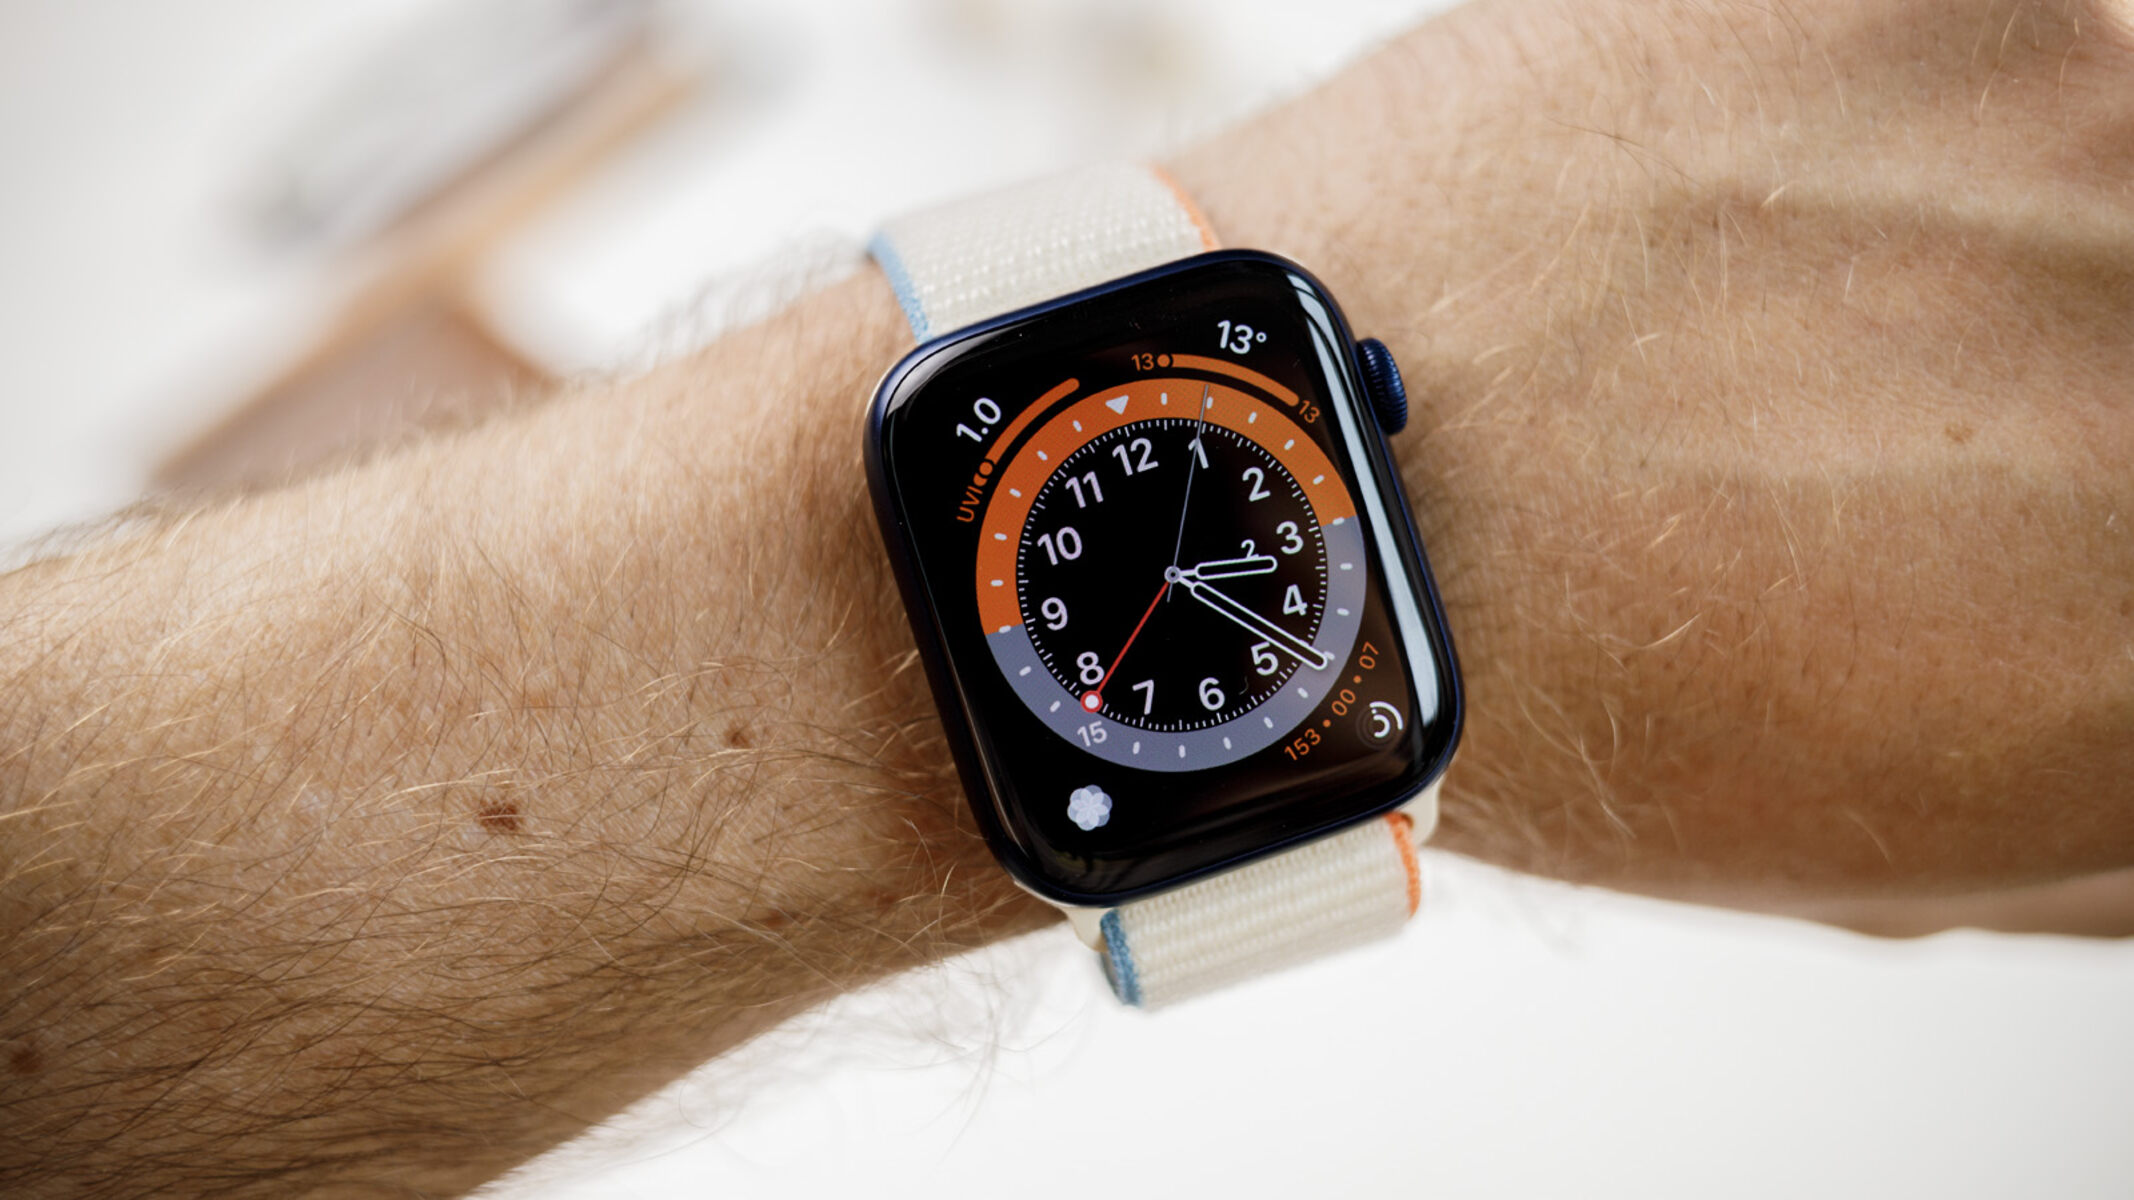 What You Can Do With The Apple Watch Without A Paired Phone